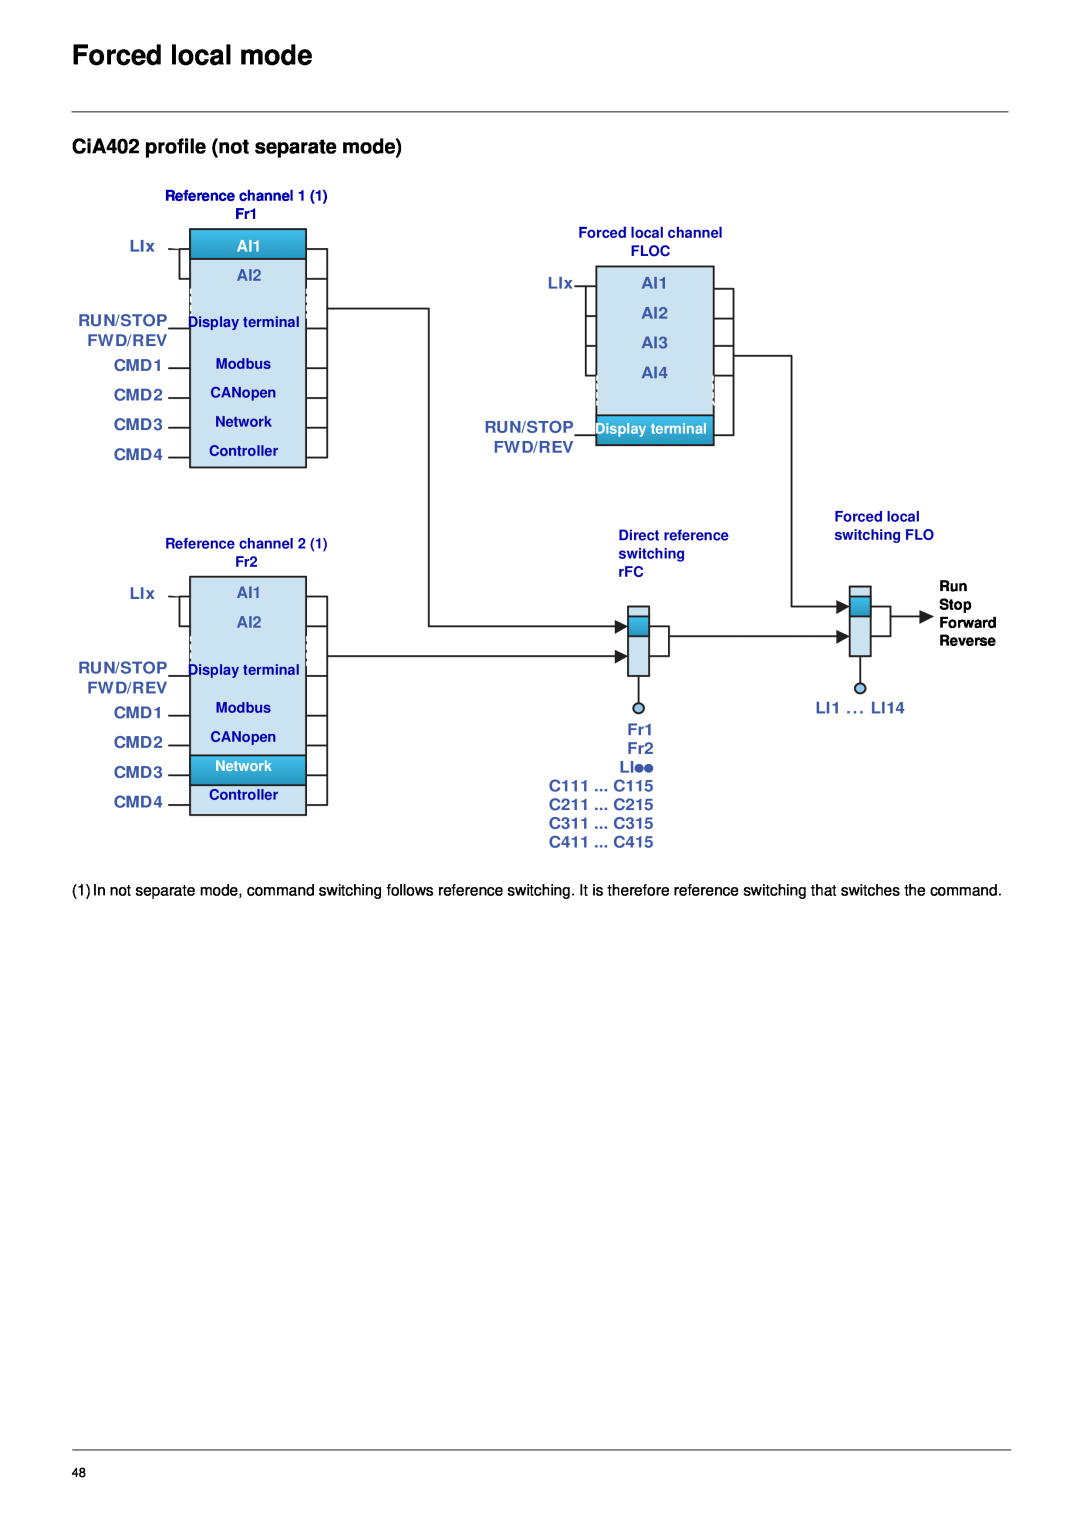 Schneider Electric 61 user manual Forced local mode, CiA402 profile not separate mode, Display terminal, Network 